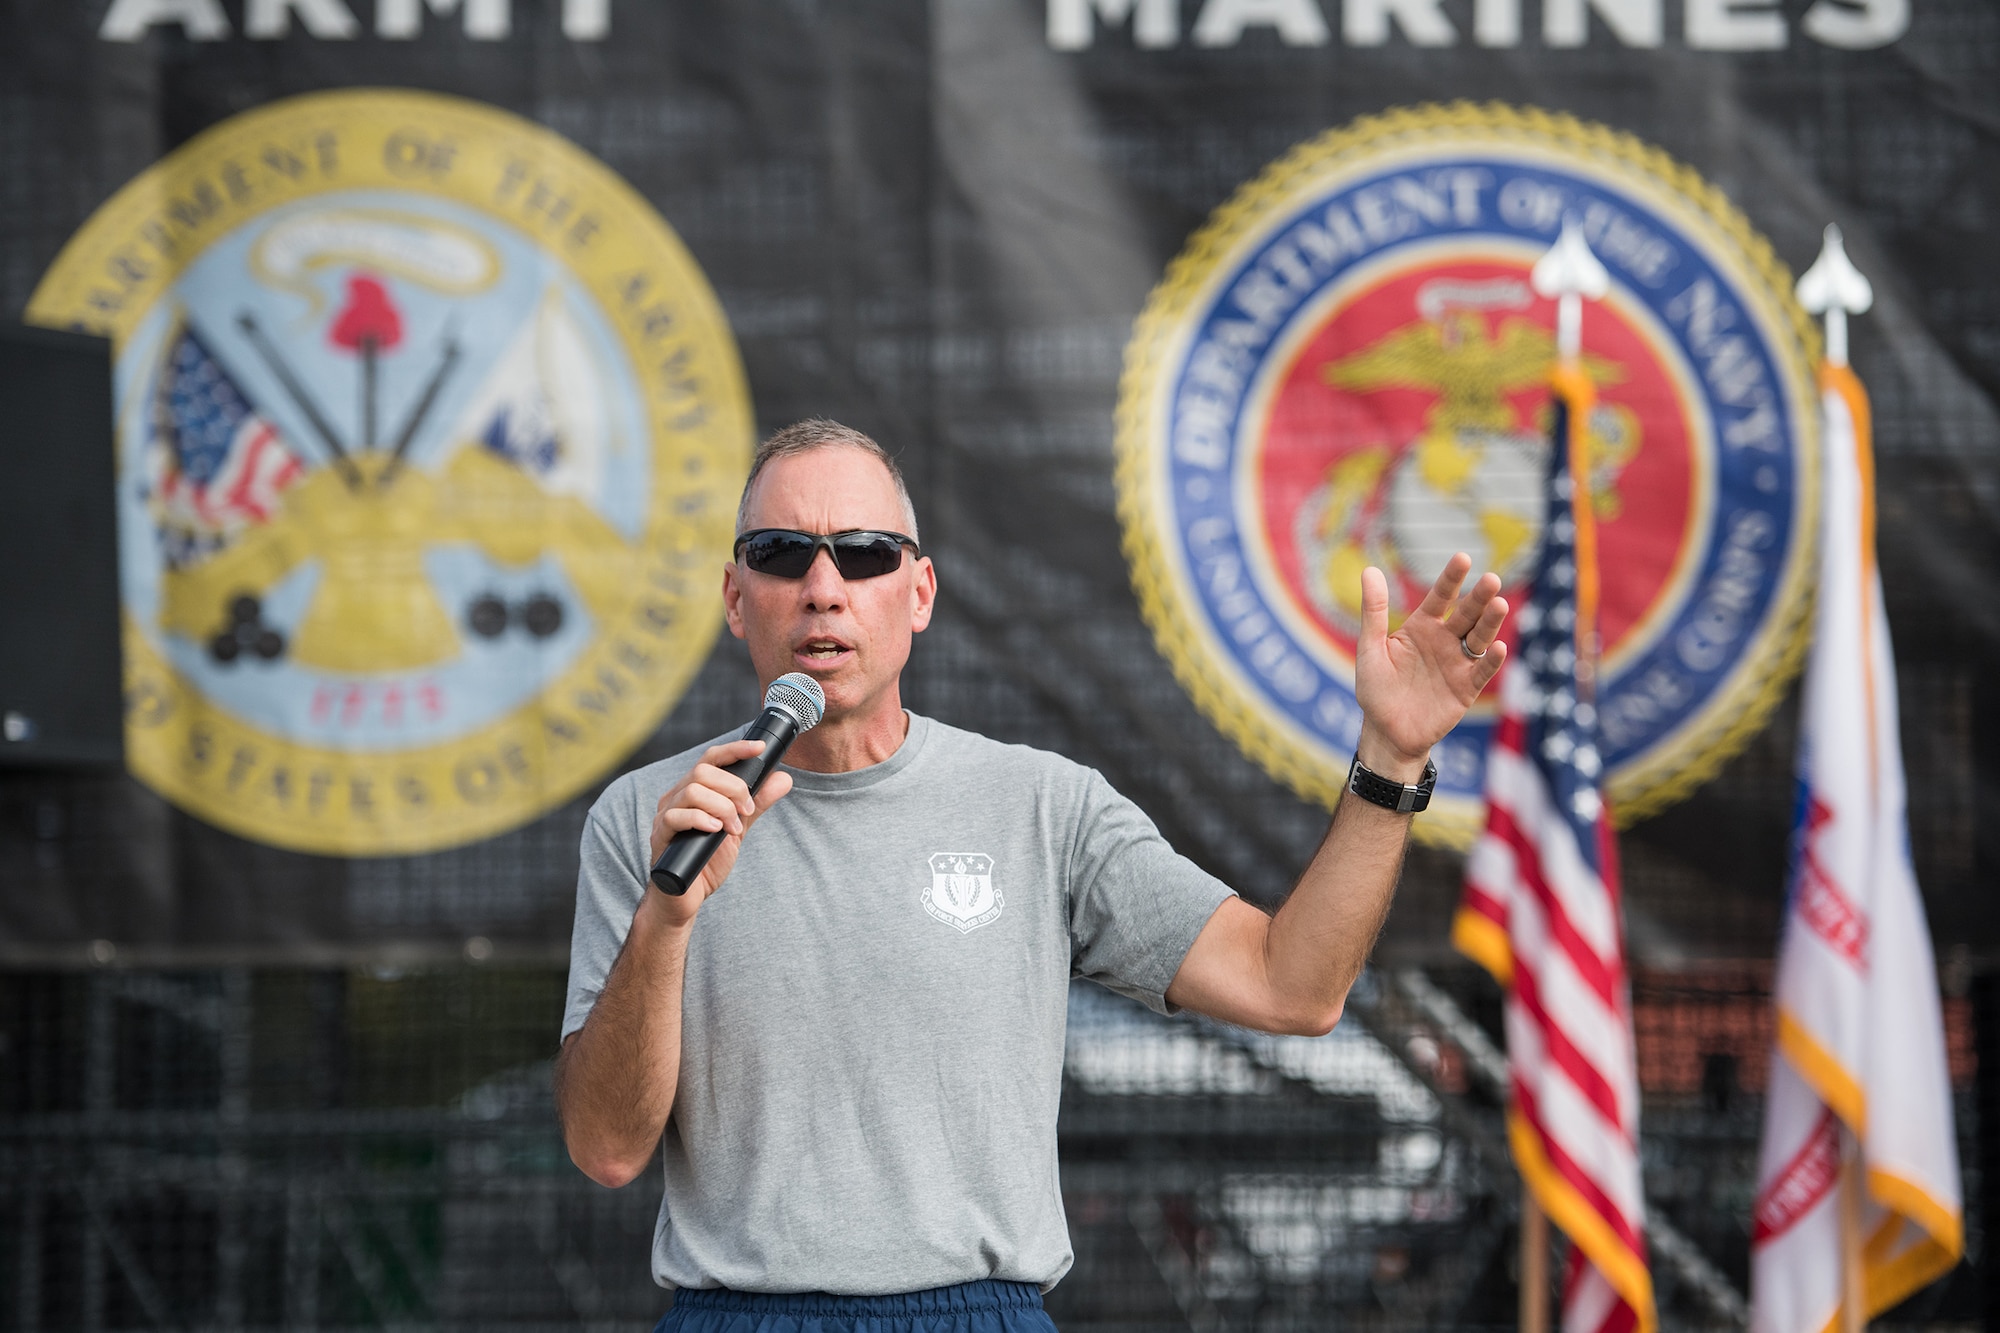 U.S. Air Force Maj. Gen. Tom Wilcox, Air Force Installation and Mission Support Center commander, gives opening remarks before the 2019 Air Force and Inter-Service Alpha Warrior Battles Sept. 12, 2019 at the Alpha Warrior Proving Grounds, Selma, Texas. The Air Force partnered with Alpha Warrior three years ago to deliver functional fitness training to Airmen and their families. (U.S. Air Force photo by Sarayuth Pinthong)